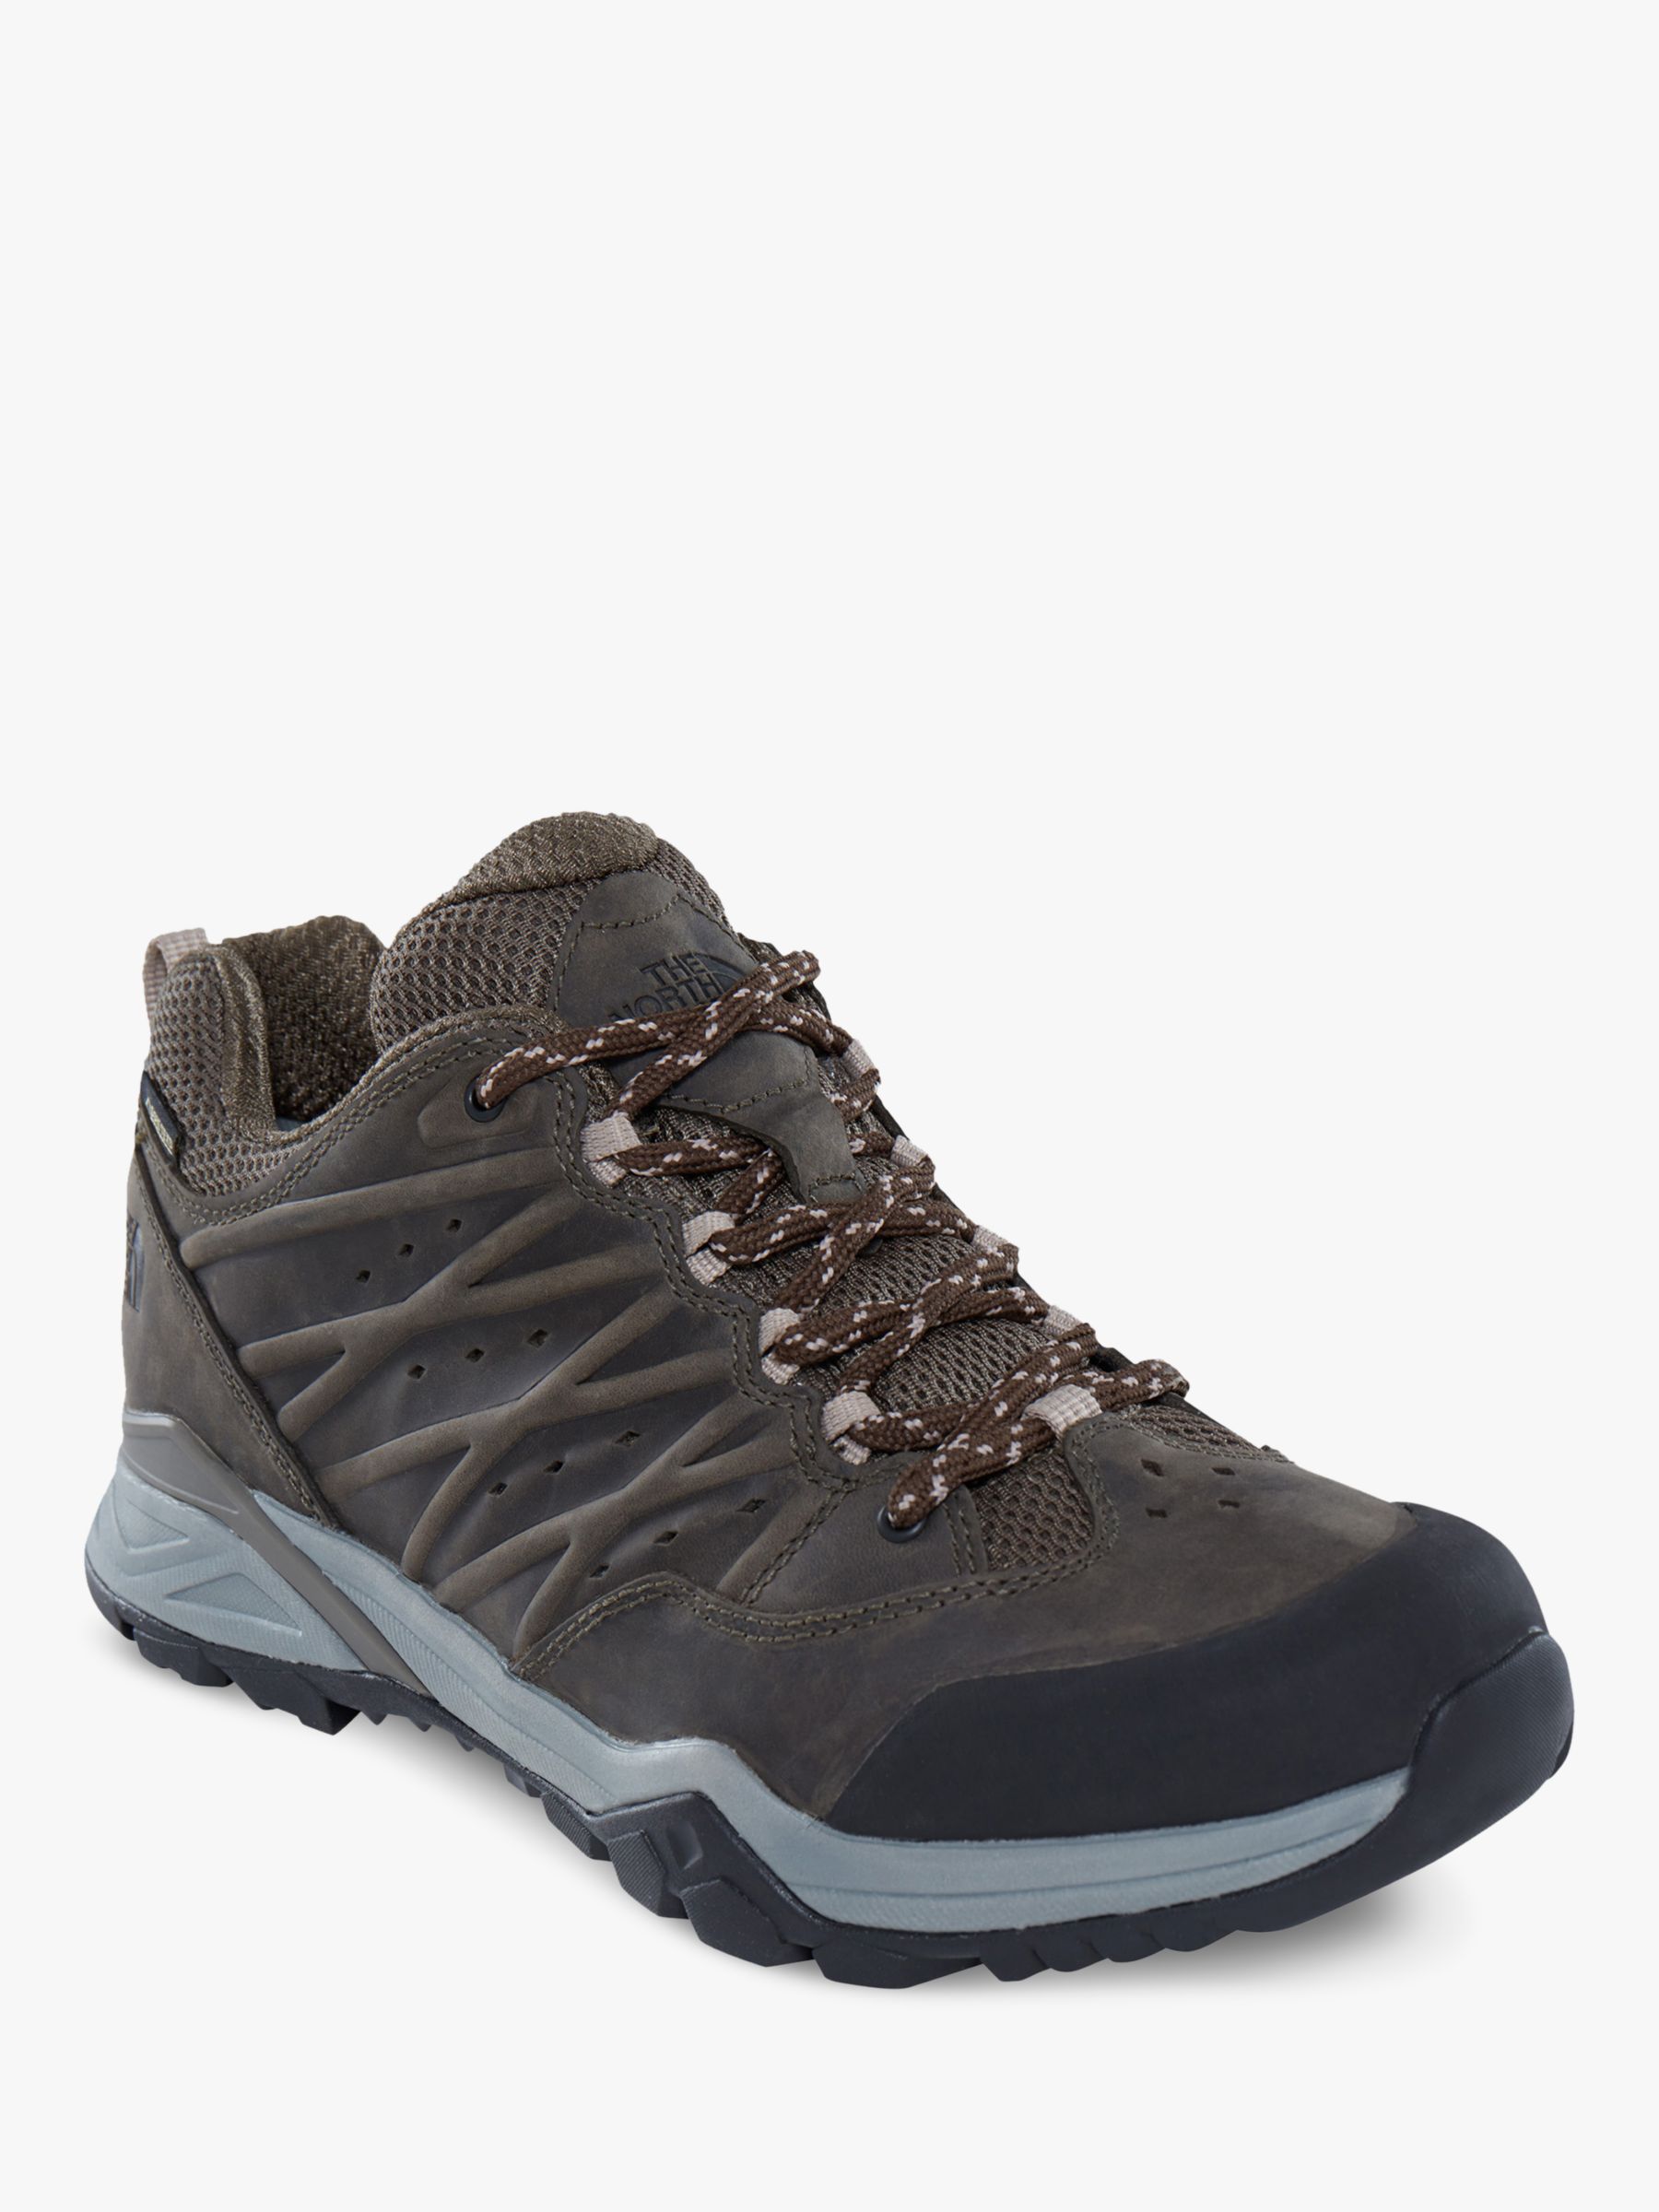 north face gore tex sneakers